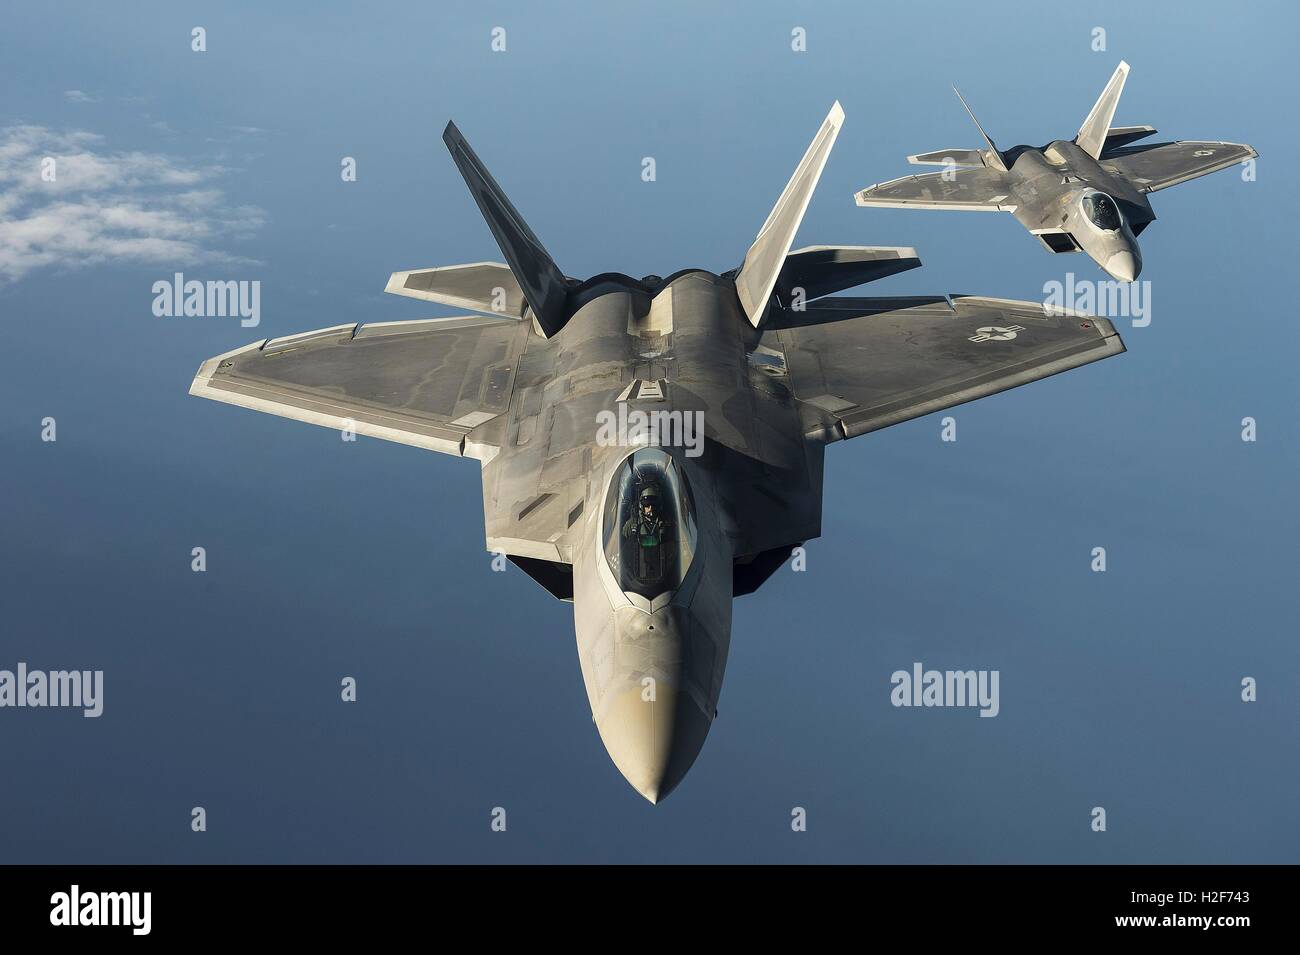 Two U.S. Air Force F-22 Raptor stealth fighter aircraft fly in formation during a training exercise September 4, 2015 over the Baltic Sea. Stock Photo